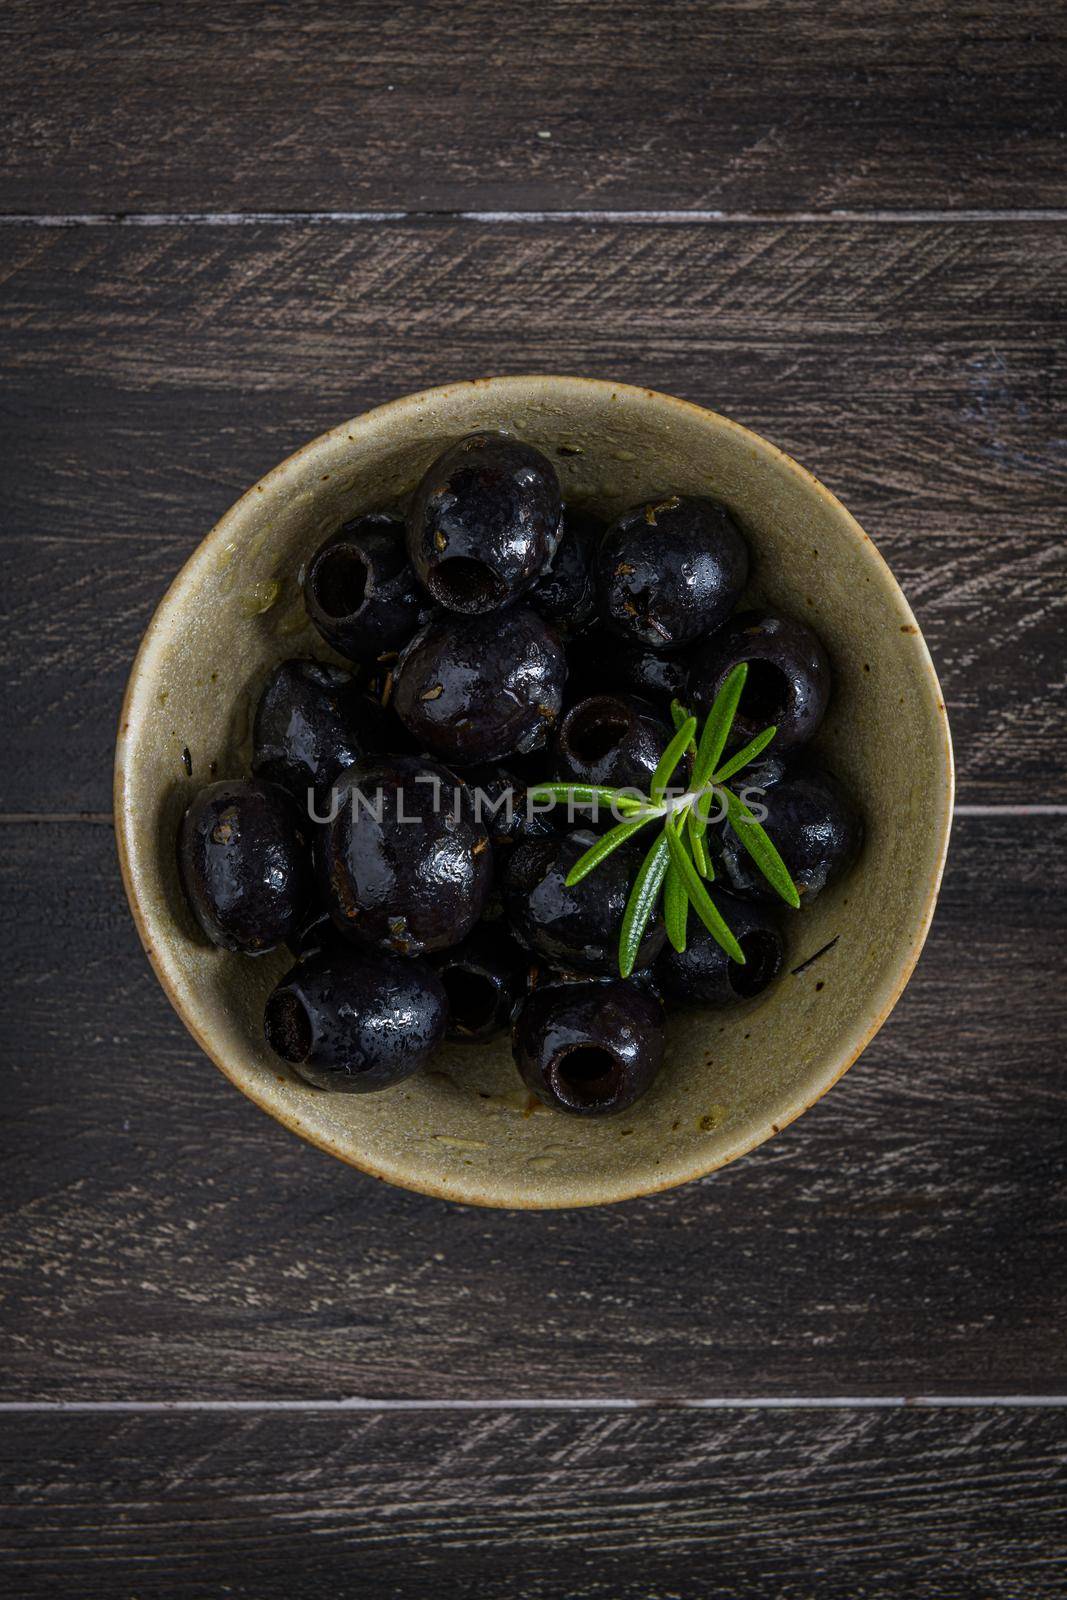 Olives in a ceramic bowl on a wooden table.